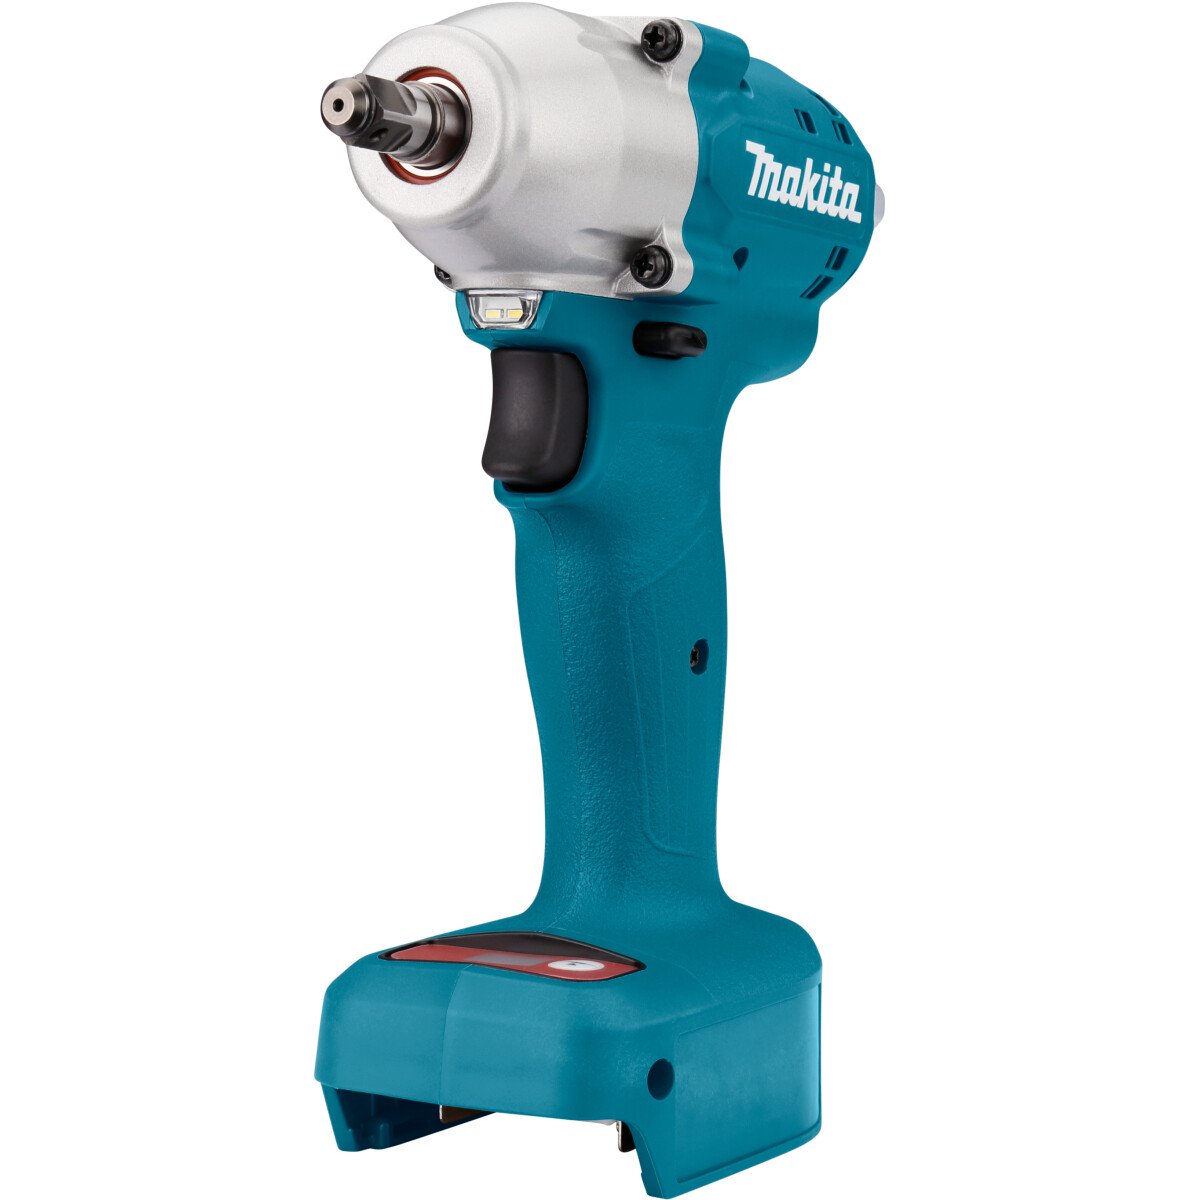 Makita DTWA070Z Body Only 14.4V Brushless Impact Wrench